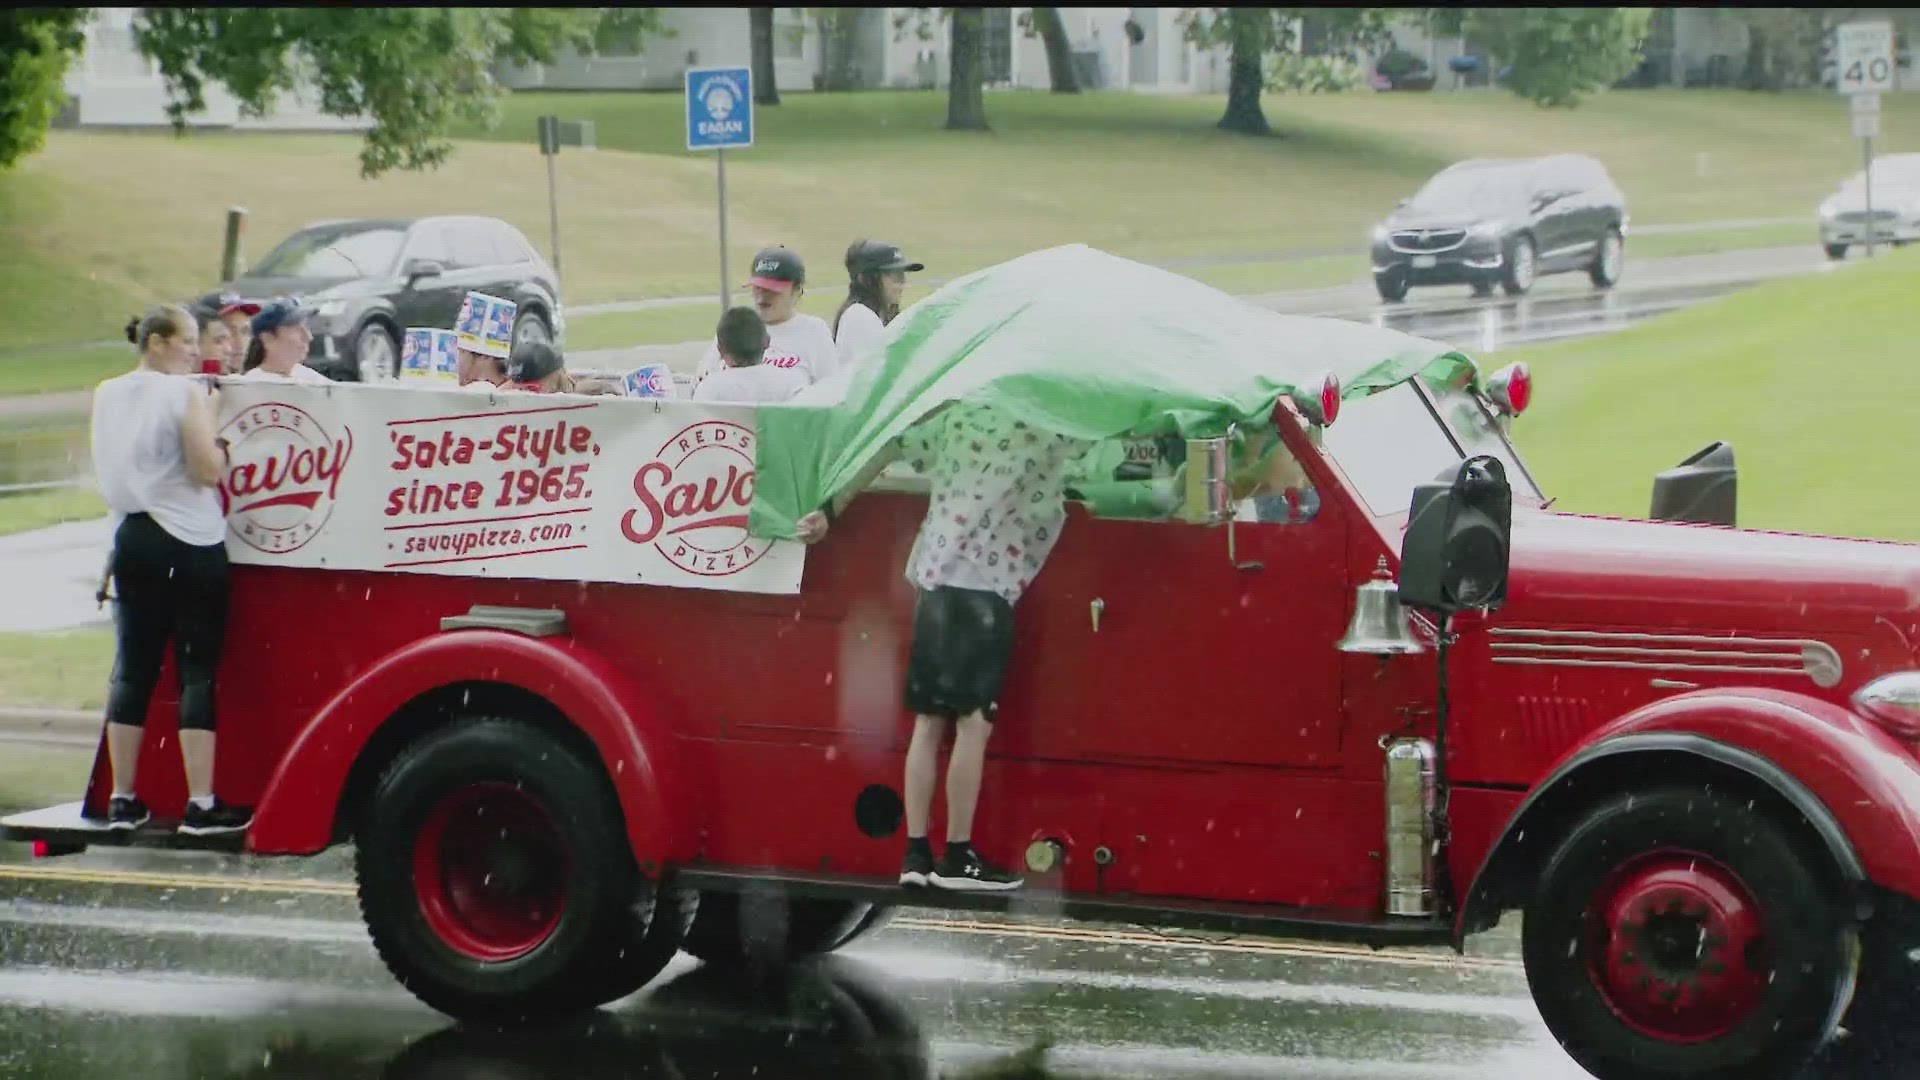 Rain, storms couldn't damper communities spirits as Fourth of July celebrations took place despite some wet weather.